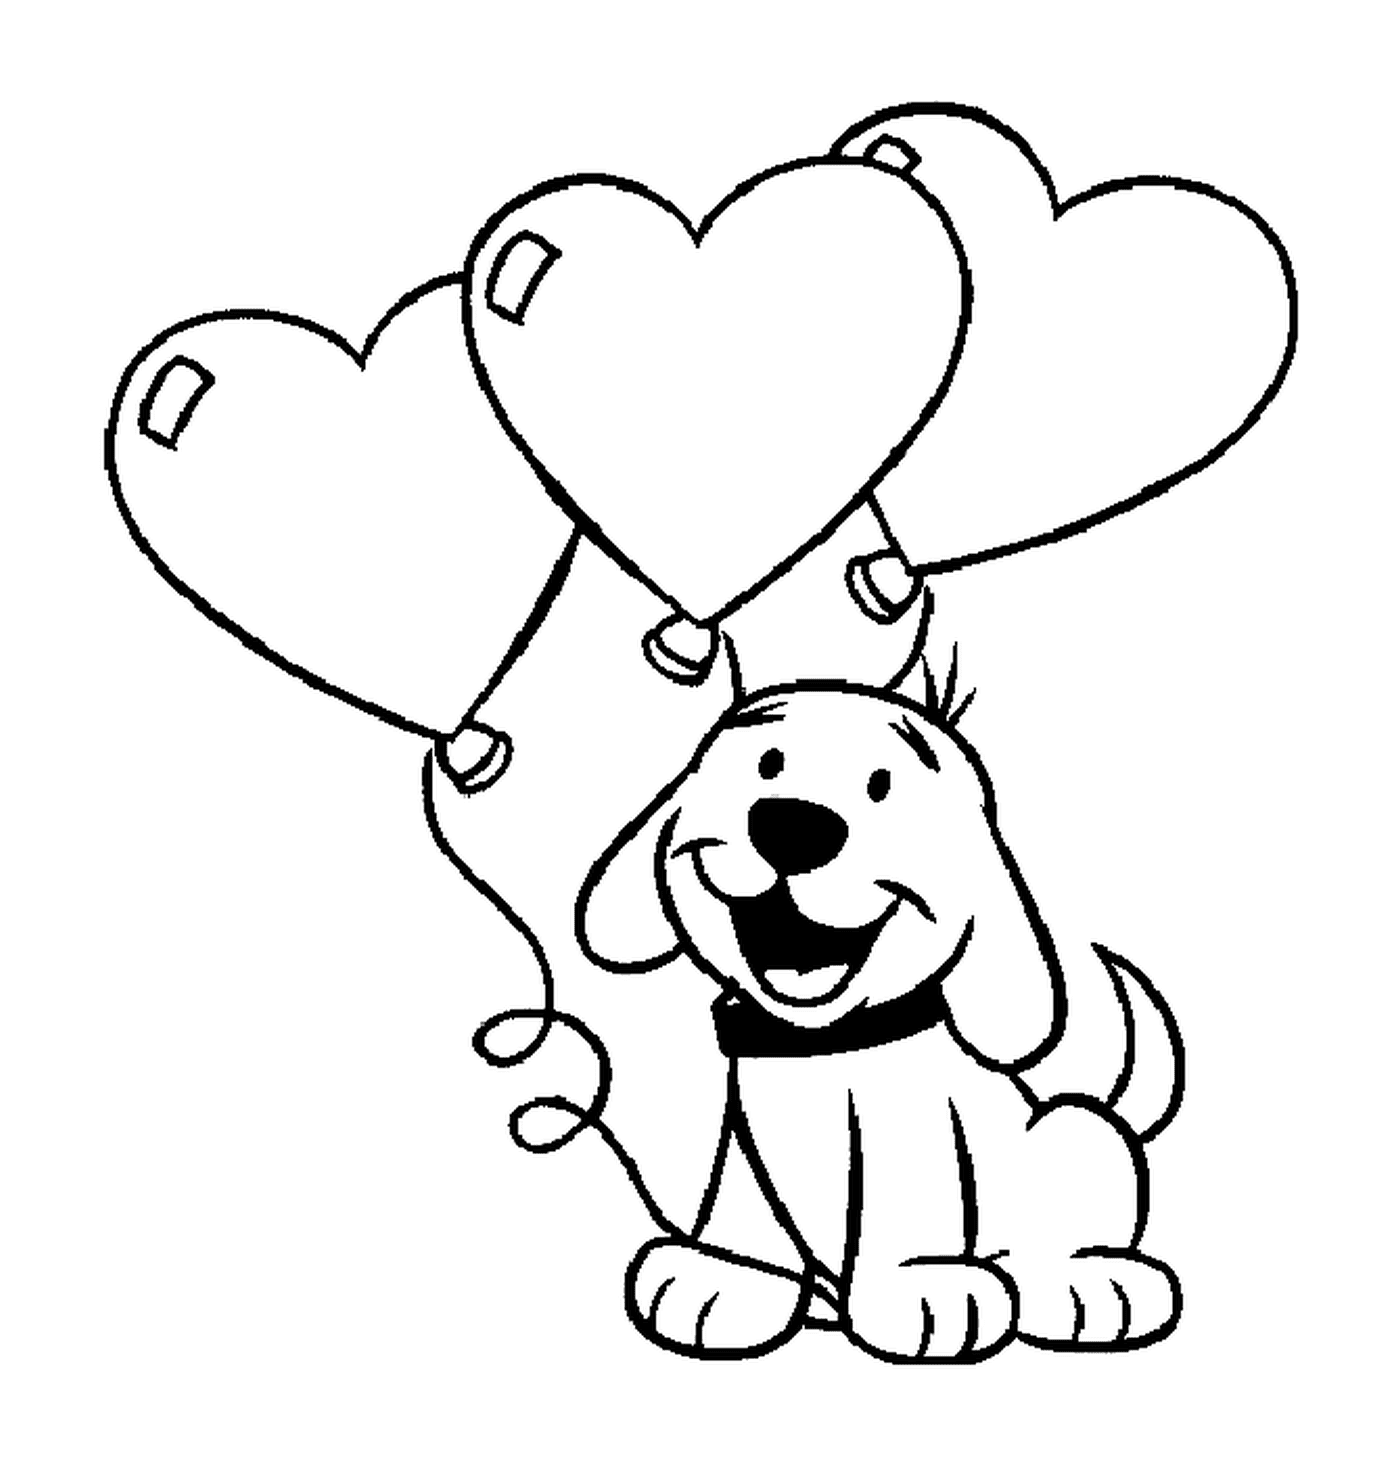  A dog holding heart-shaped balloons 